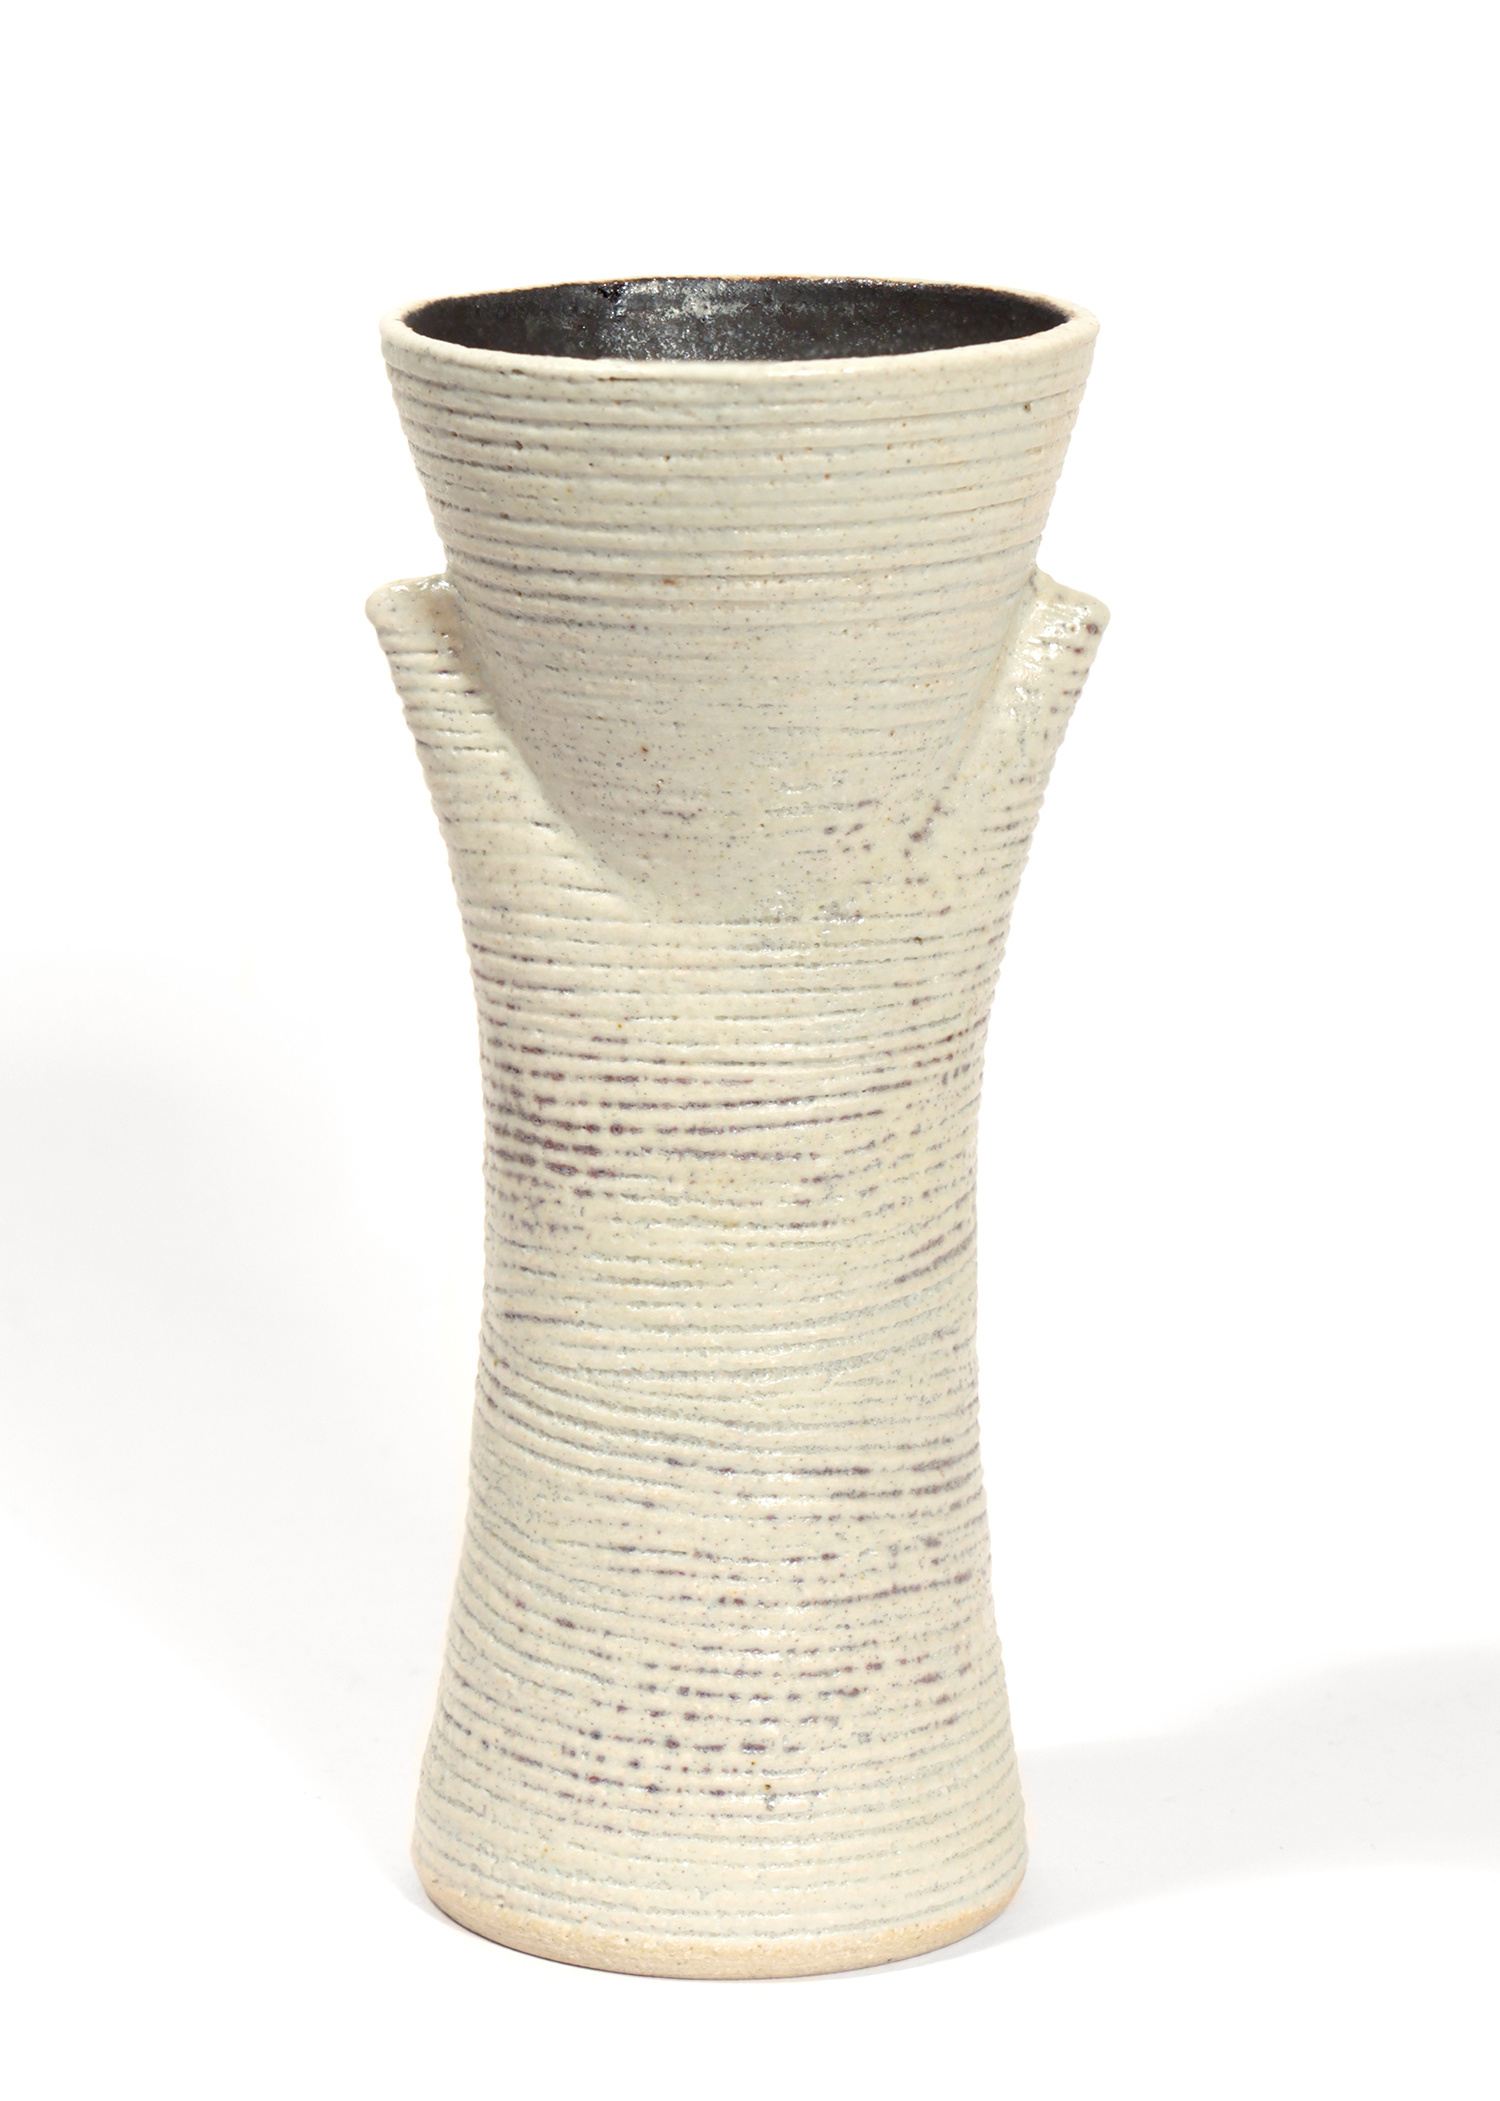 Grooved Mask Pot by Chris Carter